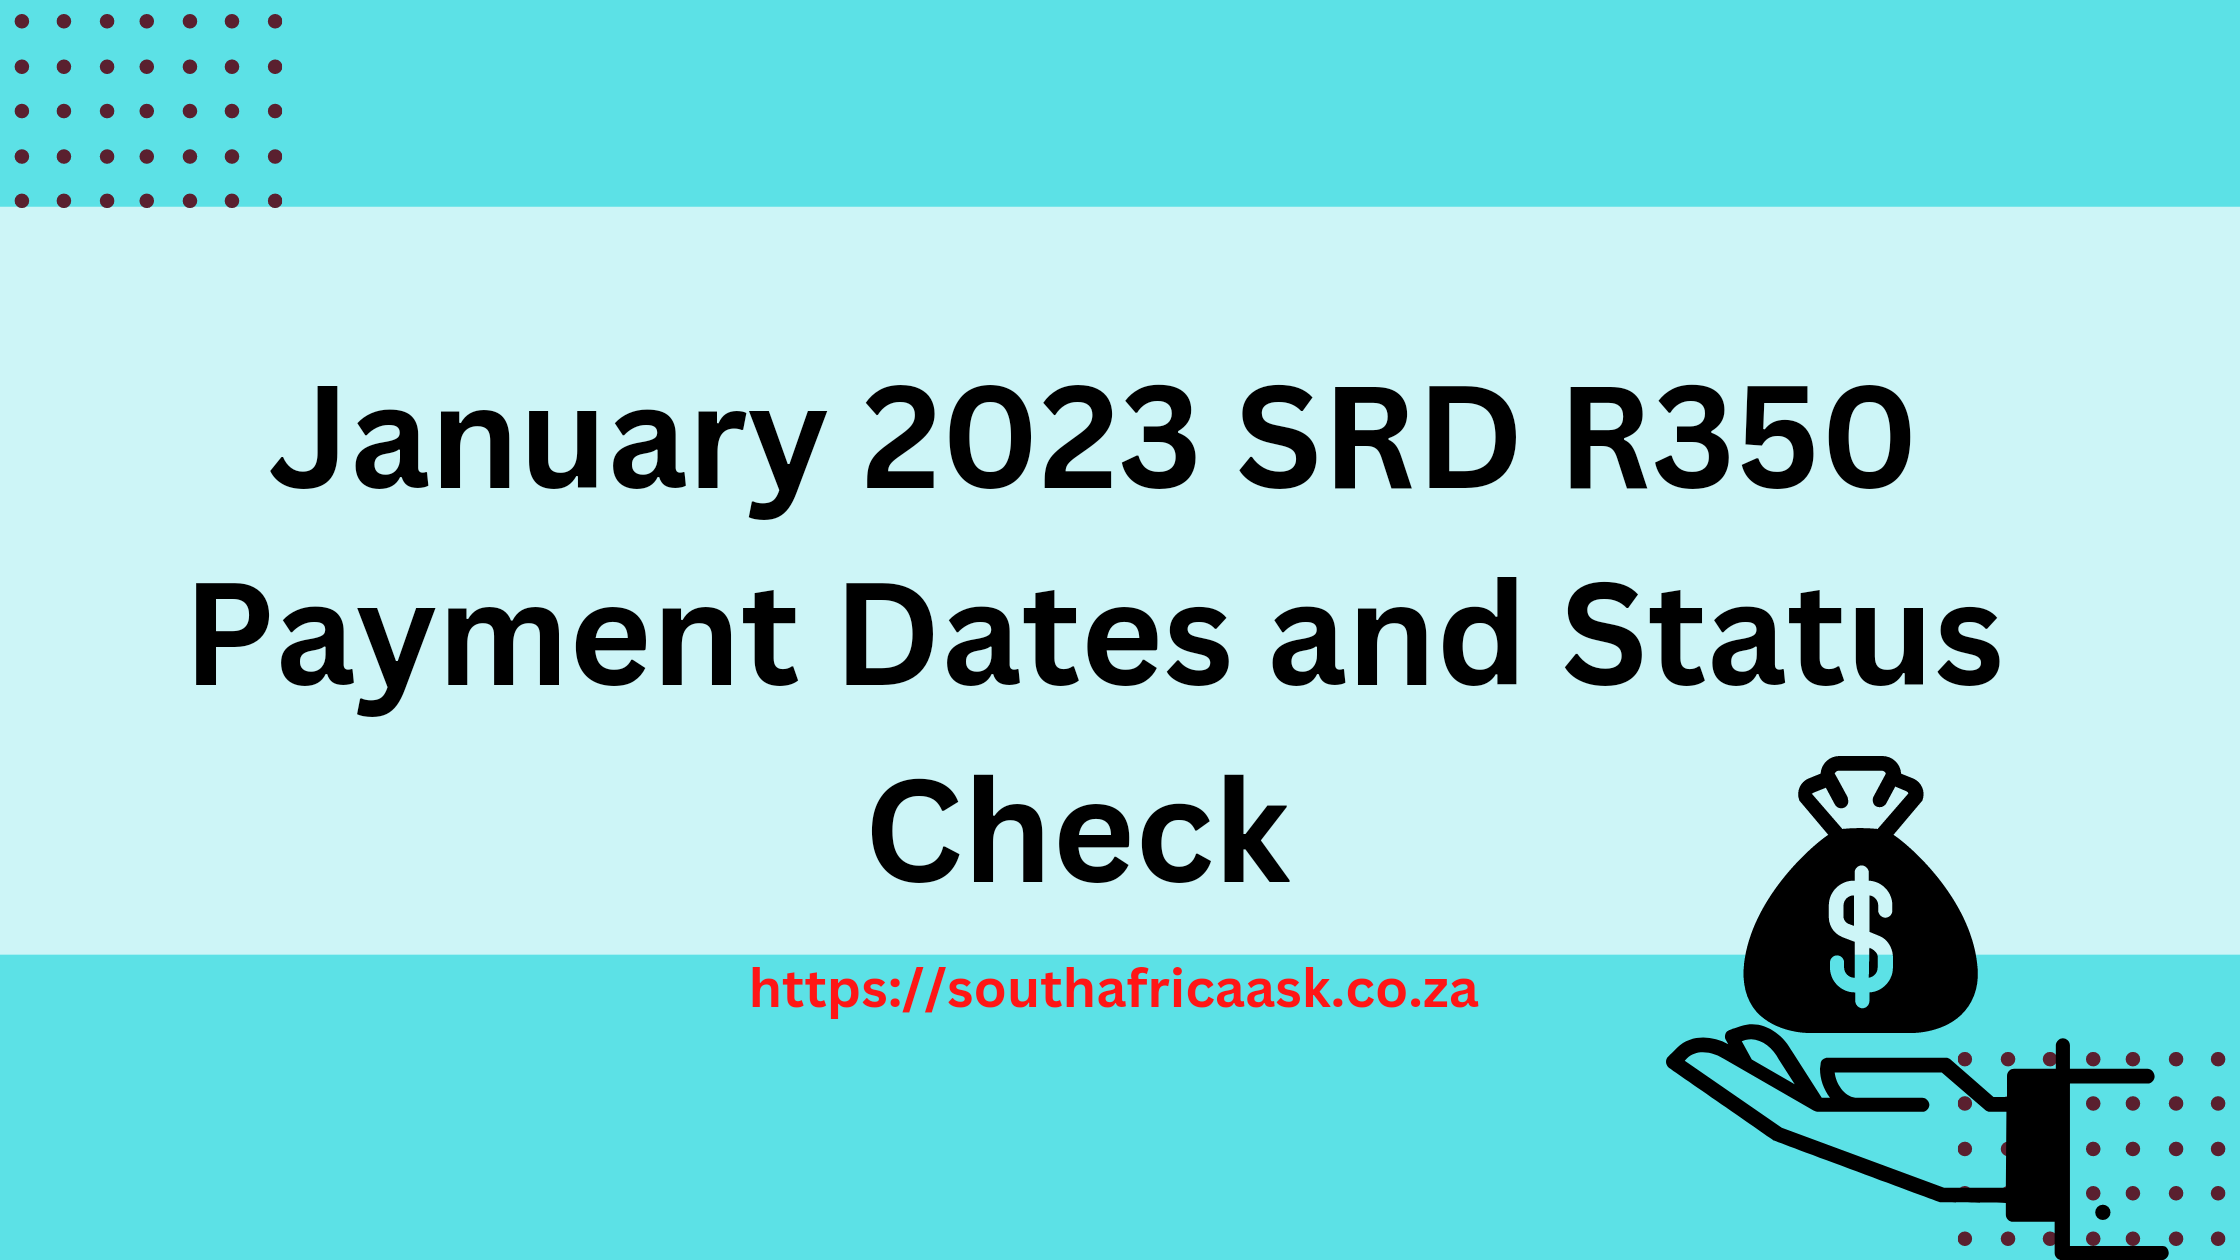 January 2023 SRD R350 Payment Dates and Status Check